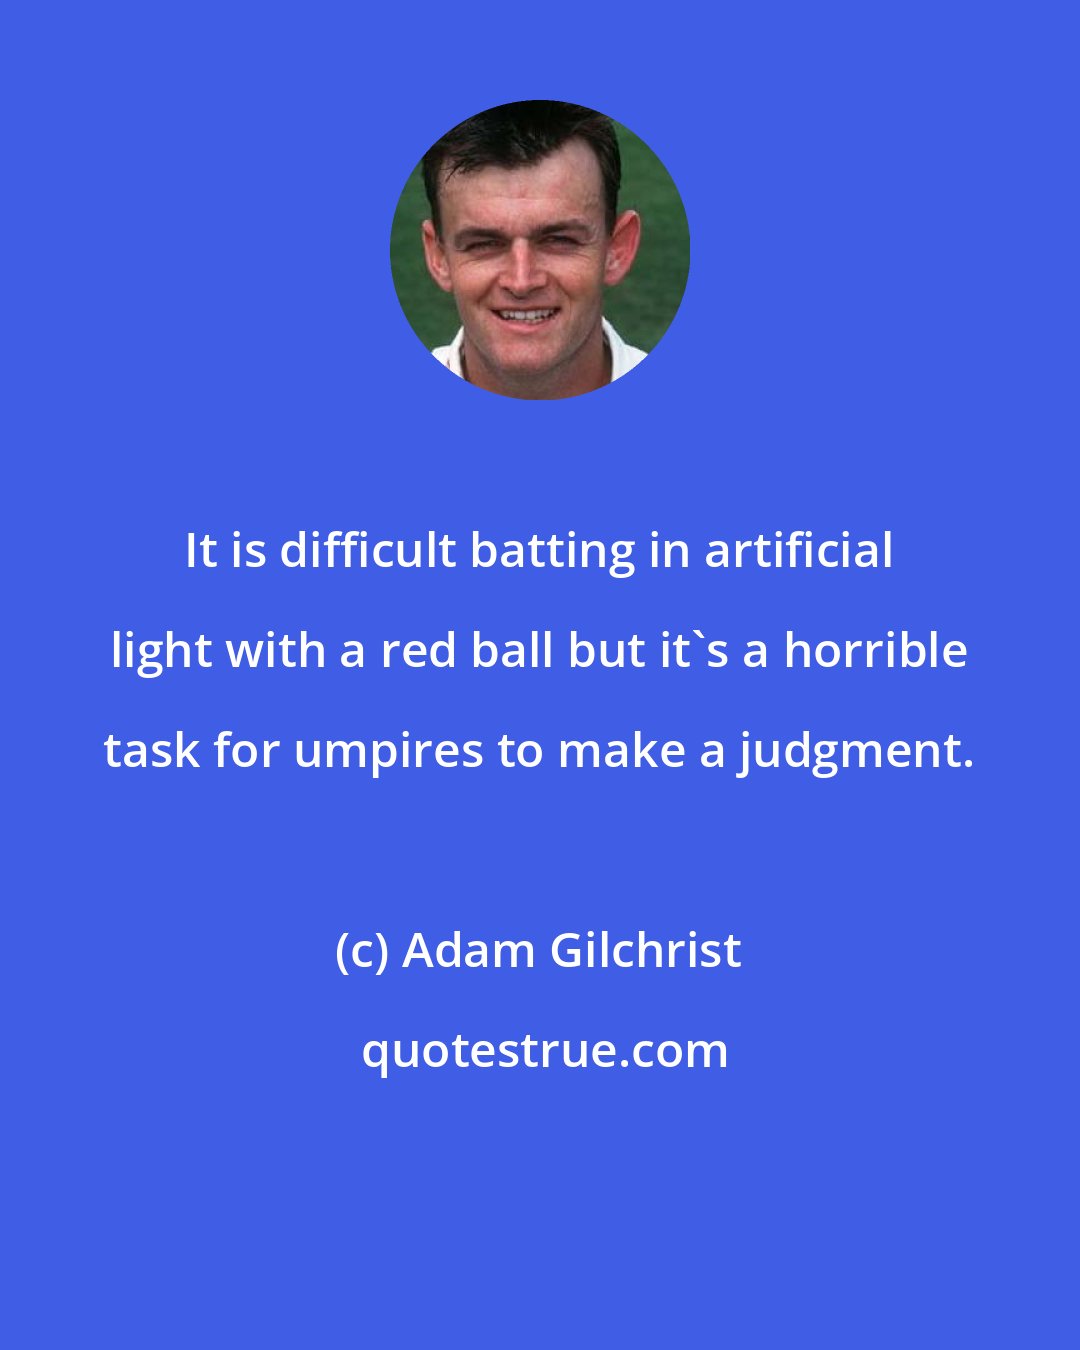 Adam Gilchrist: It is difficult batting in artificial light with a red ball but it's a horrible task for umpires to make a judgment.